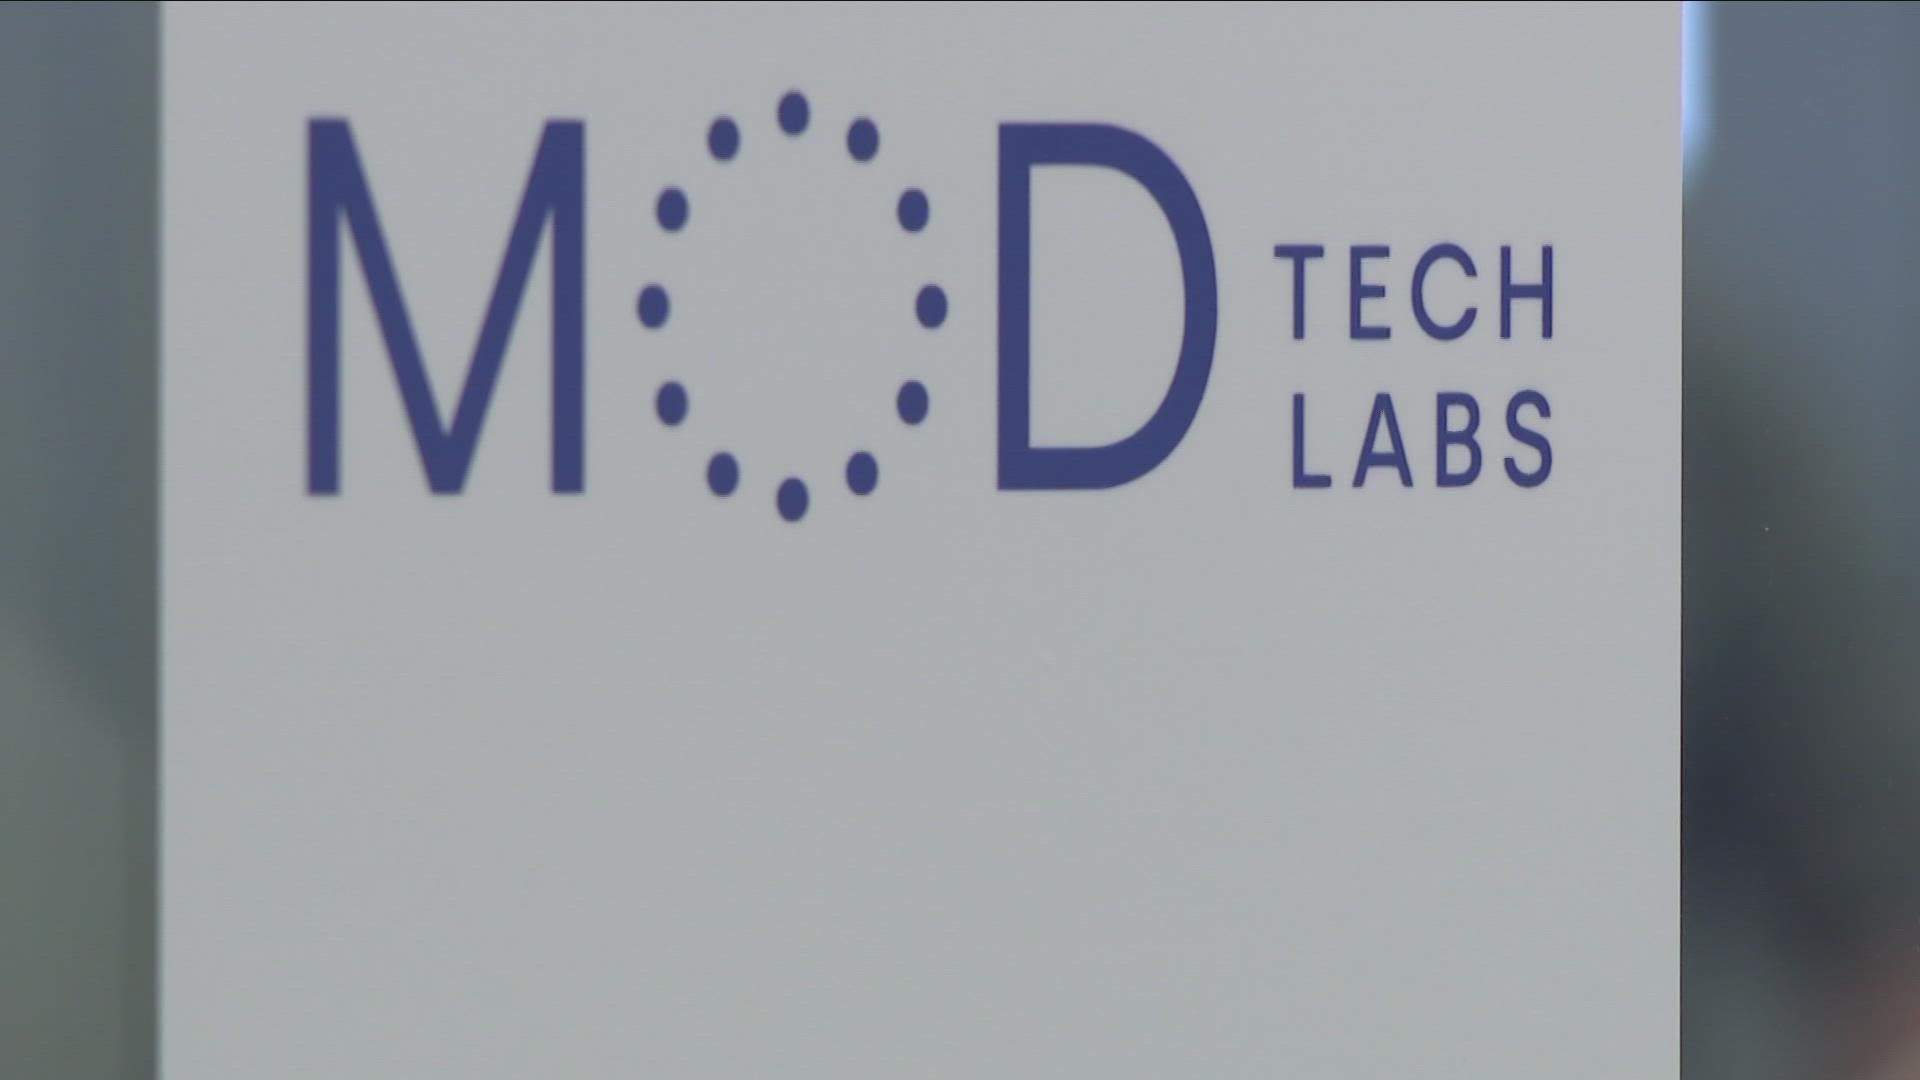 Tim and Alex Porter are moving their company -- Mod Tech Labs -- from Austin.